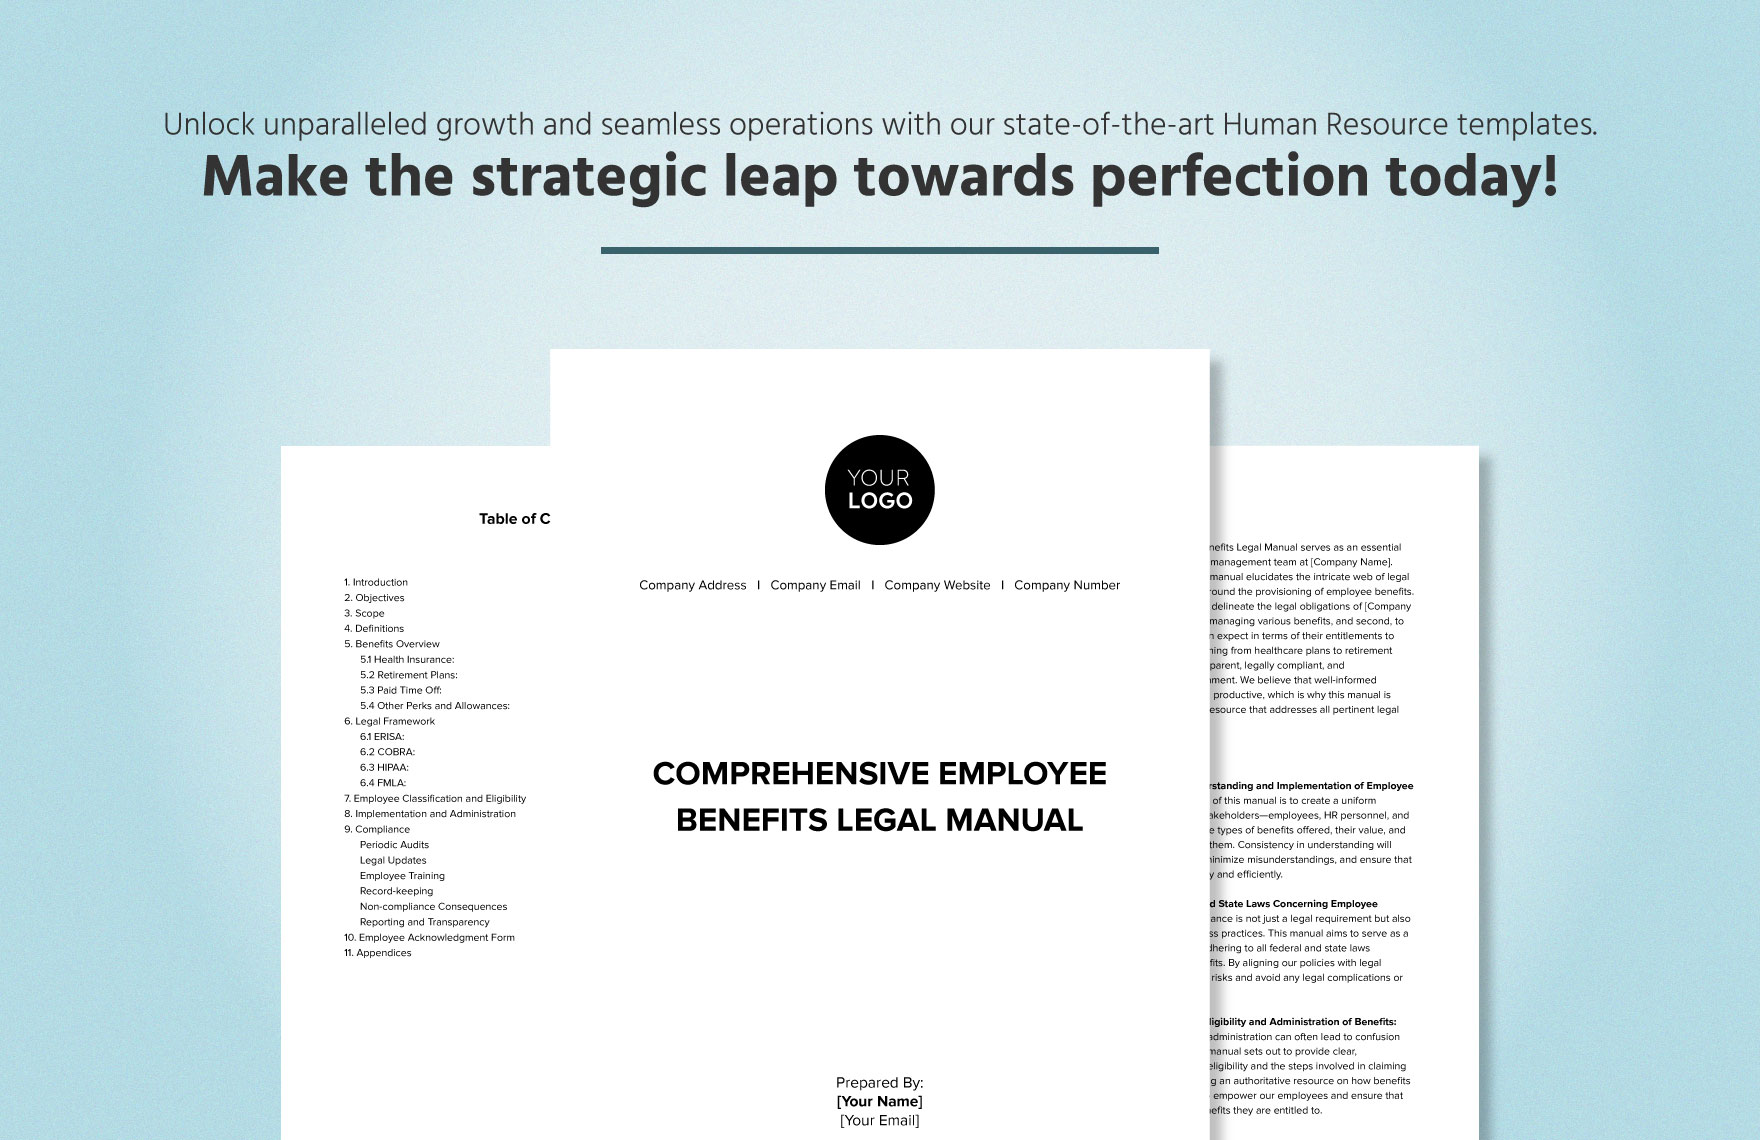 Comprehensive Employee Benefits Legal Manual HR Template